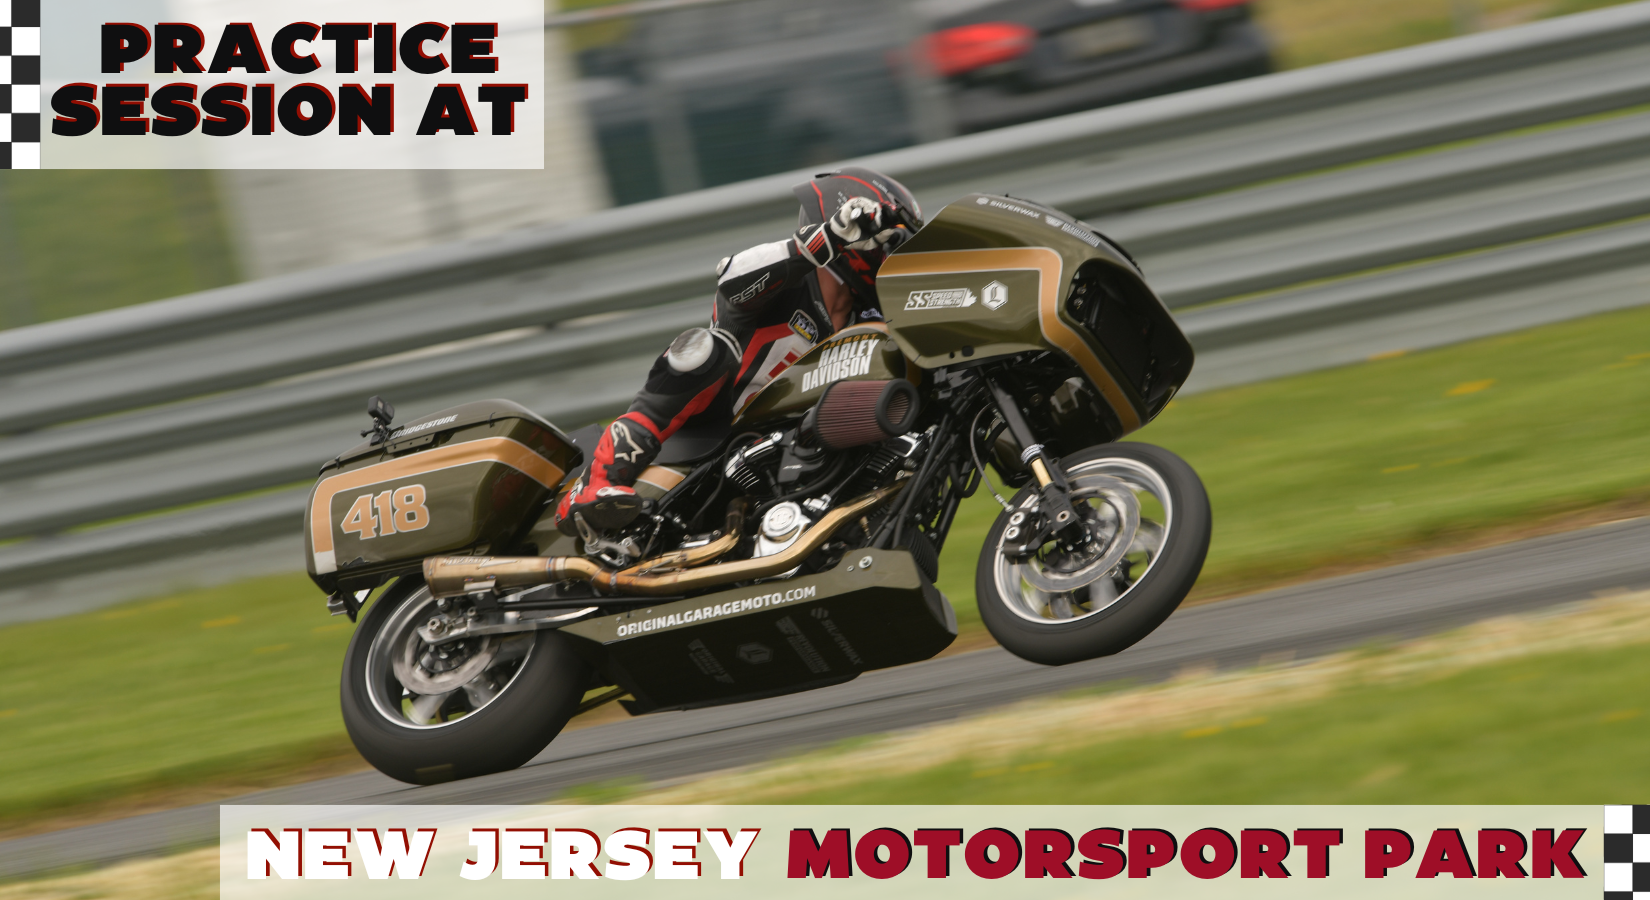 Revving Up for the Bagger Racing League: Practice Session at New Jersey Motorsport Park